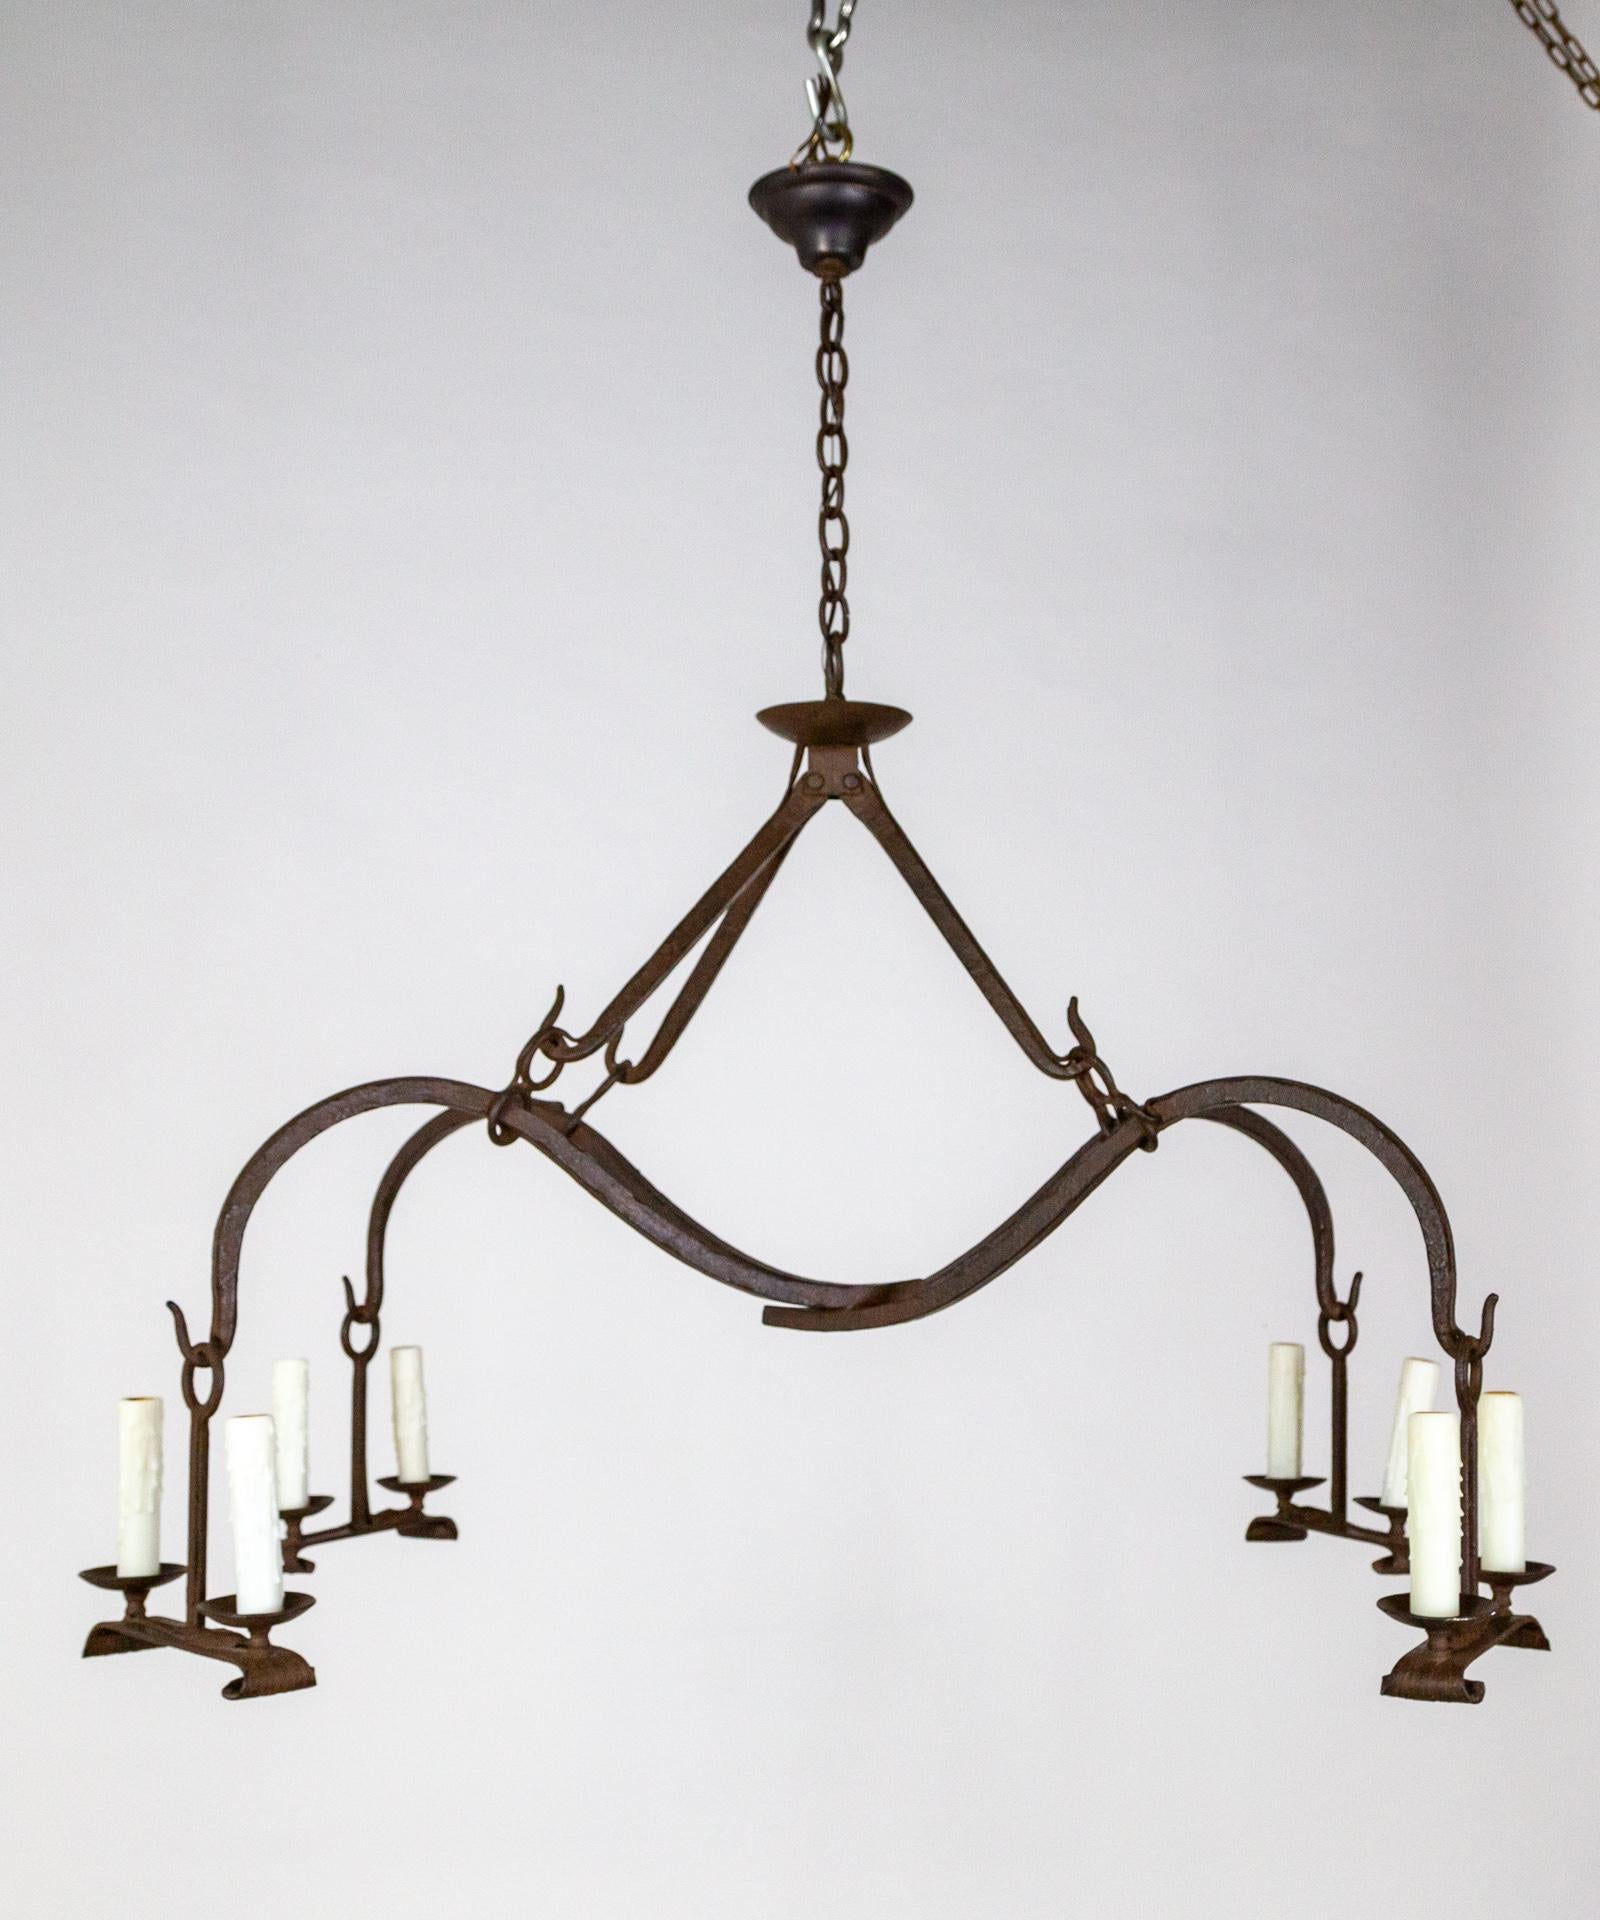 A uniquely shaped iron chandelier with criss-crossed, swooping arms and four hanging twin candle style lights. A powerful modern Gothic design with a spacious feel by Dennis and Leen with hammered hook details in a black finish. 21st century. Takes